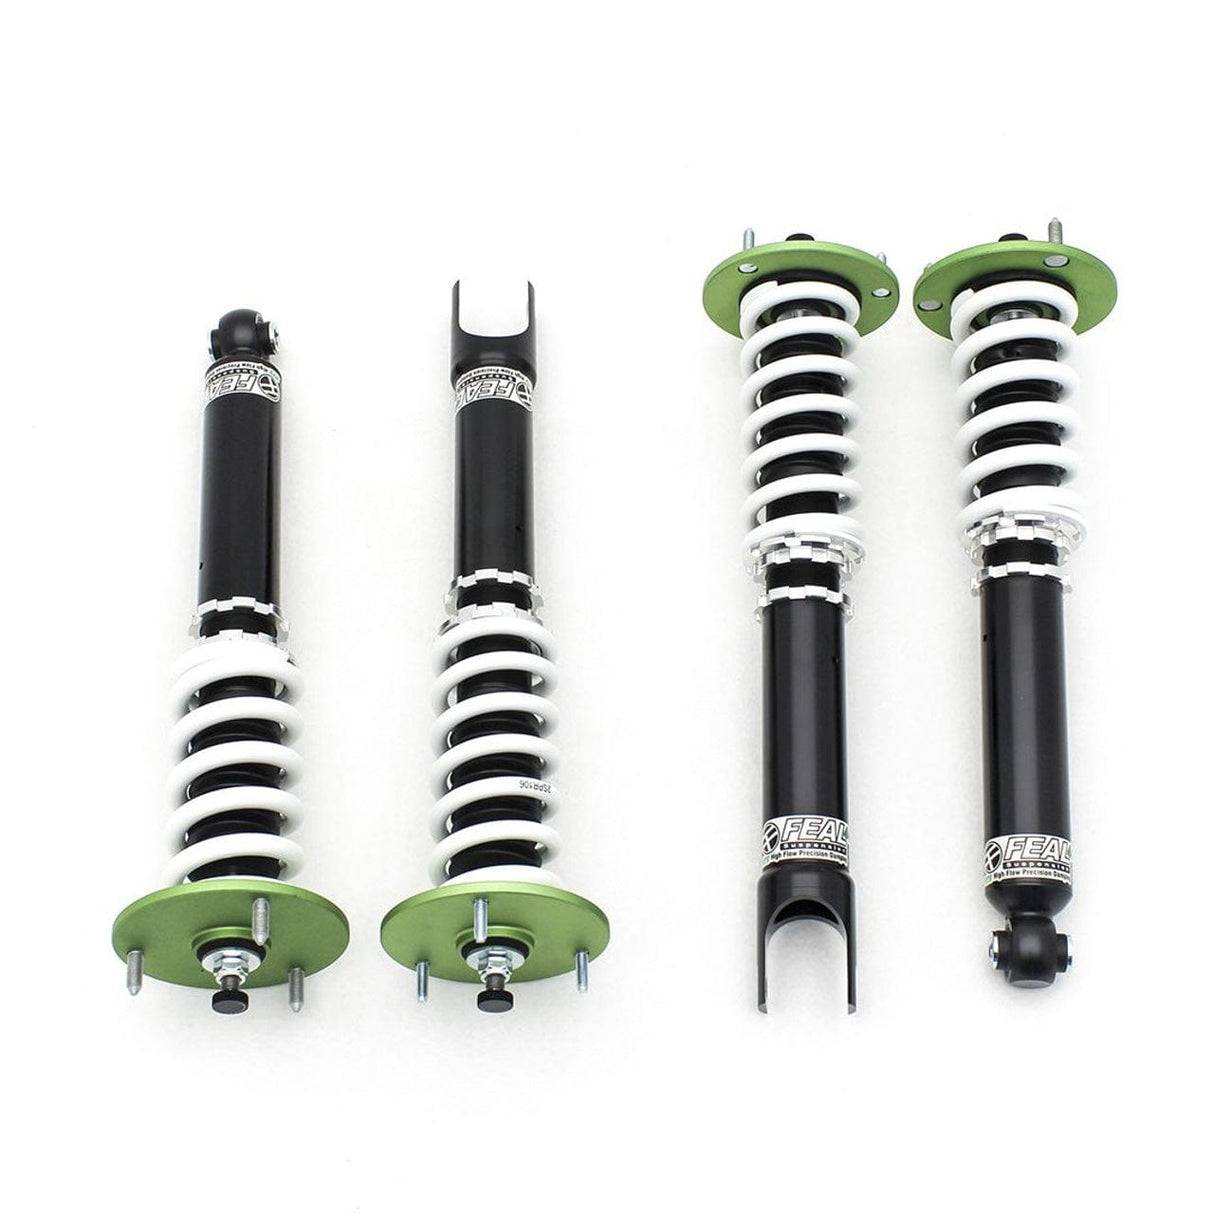 Feal 441 Coilovers - 2005-2014 Ford Mustang S197